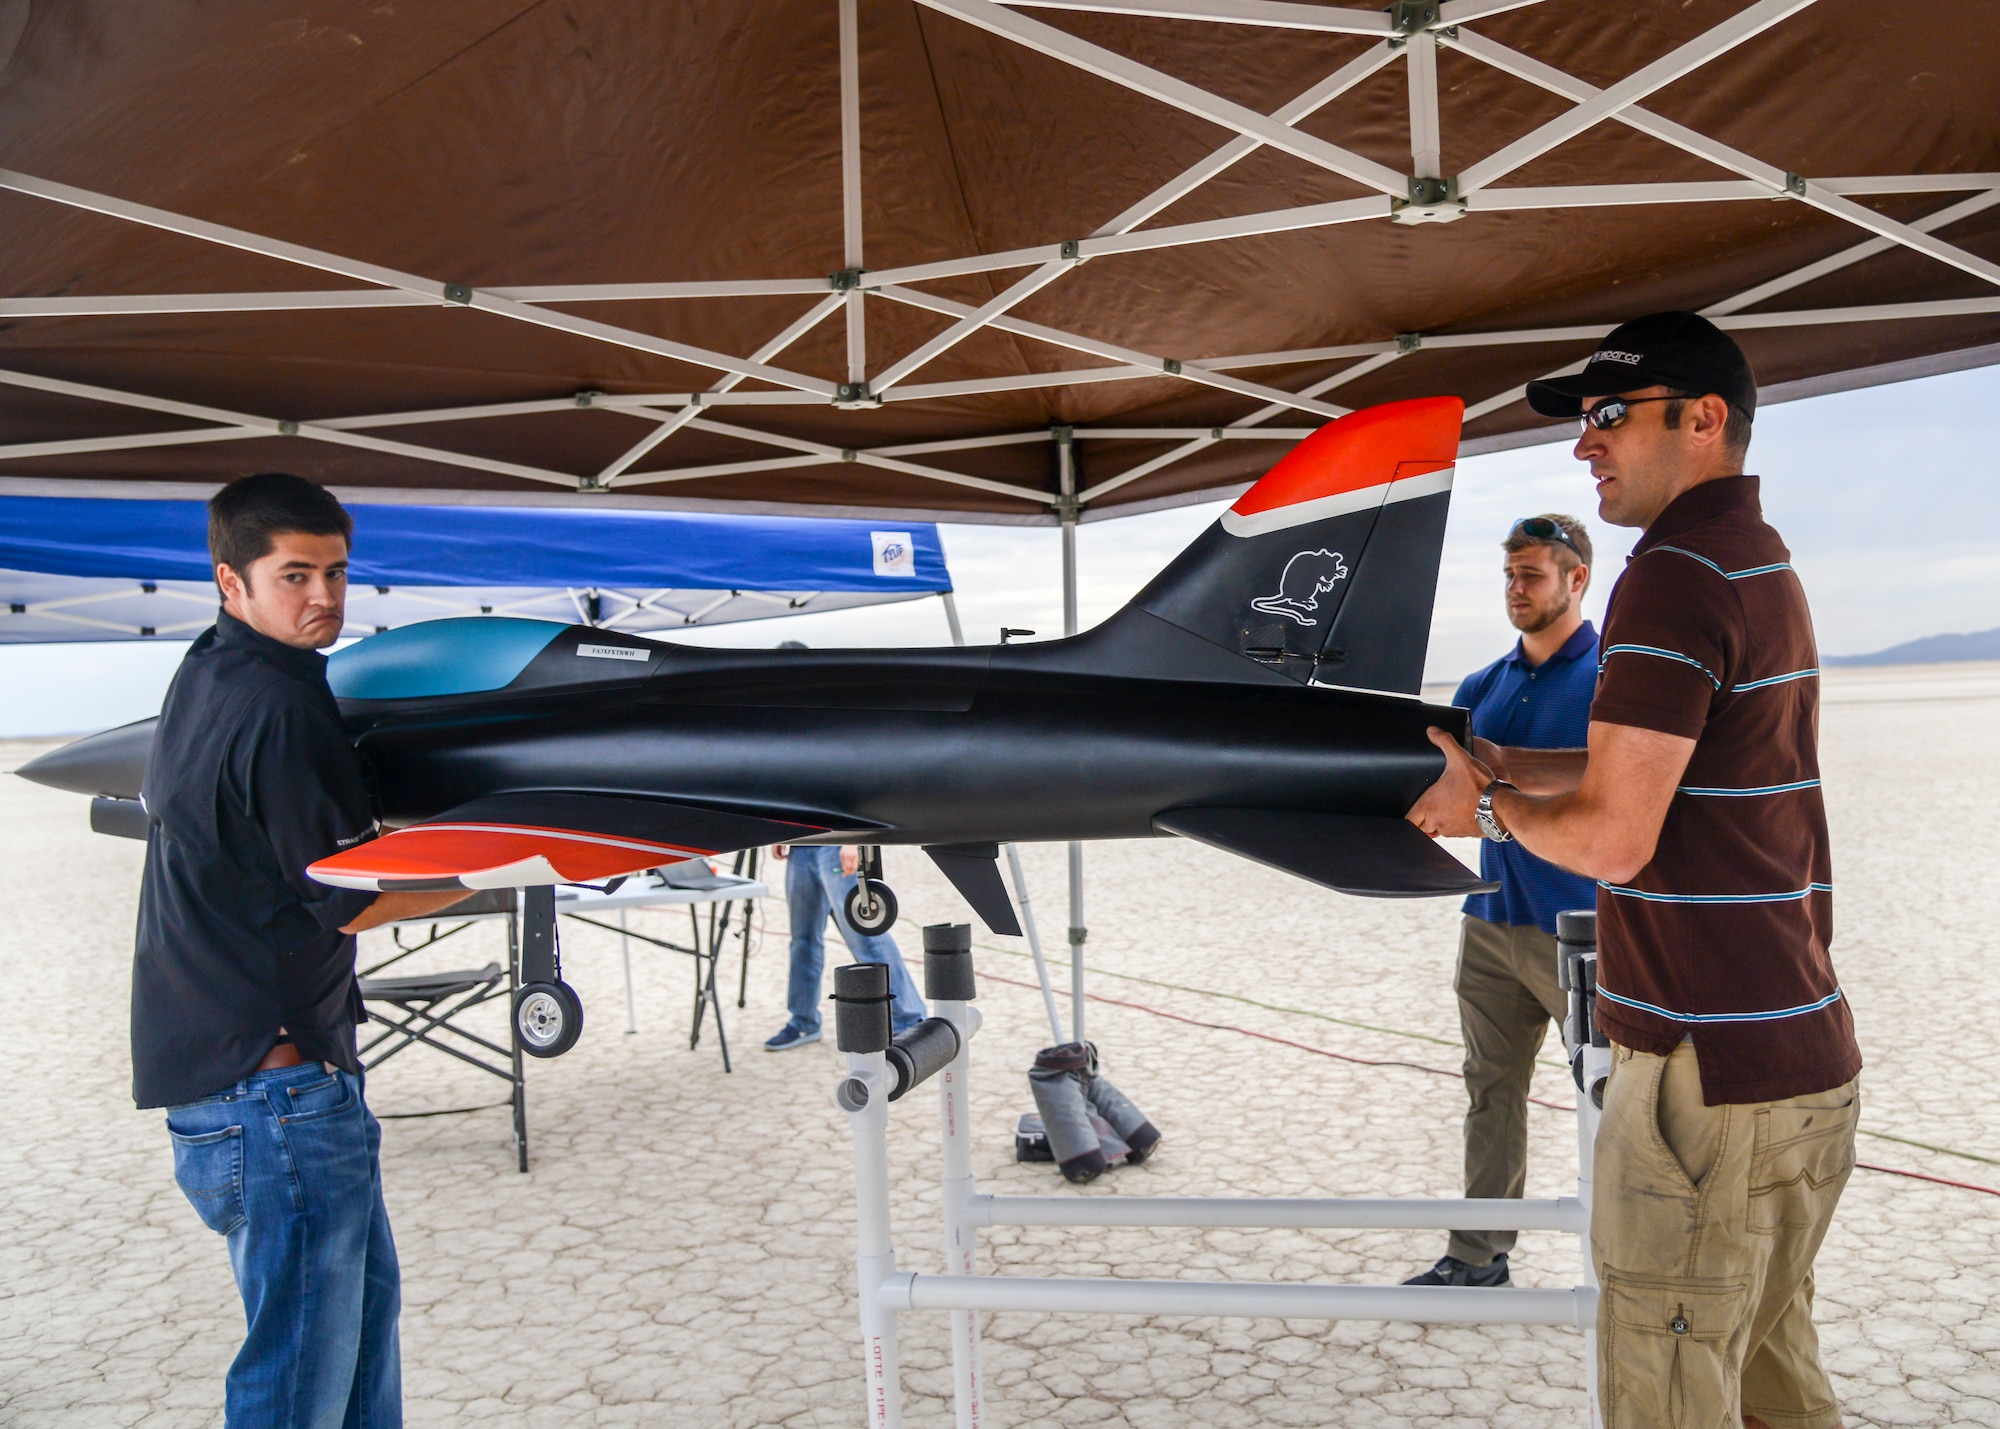 Engineers lift an unmanned jet-powered aircraft into position for a flight test at Edwards Air Force Base, Calif., July 25. (U.S. Air Force photo by Giancarlo Casem)